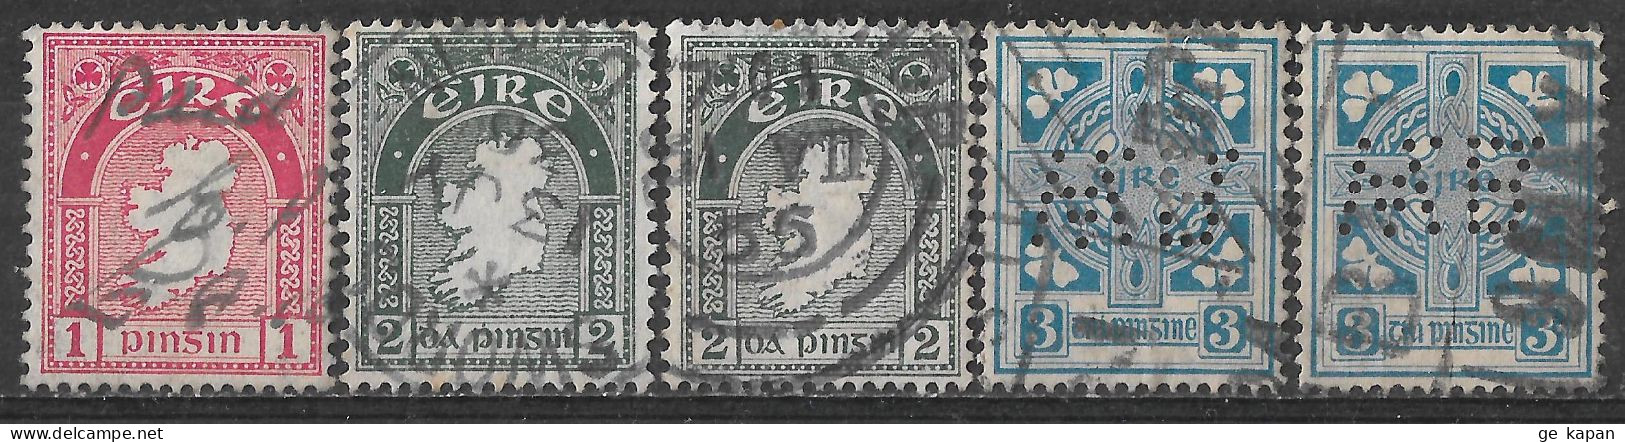 1922-1923 IRELAND SET OF 5 USED STAMPS (Michel # 41A,43A,45A) CV €5.30 - Used Stamps